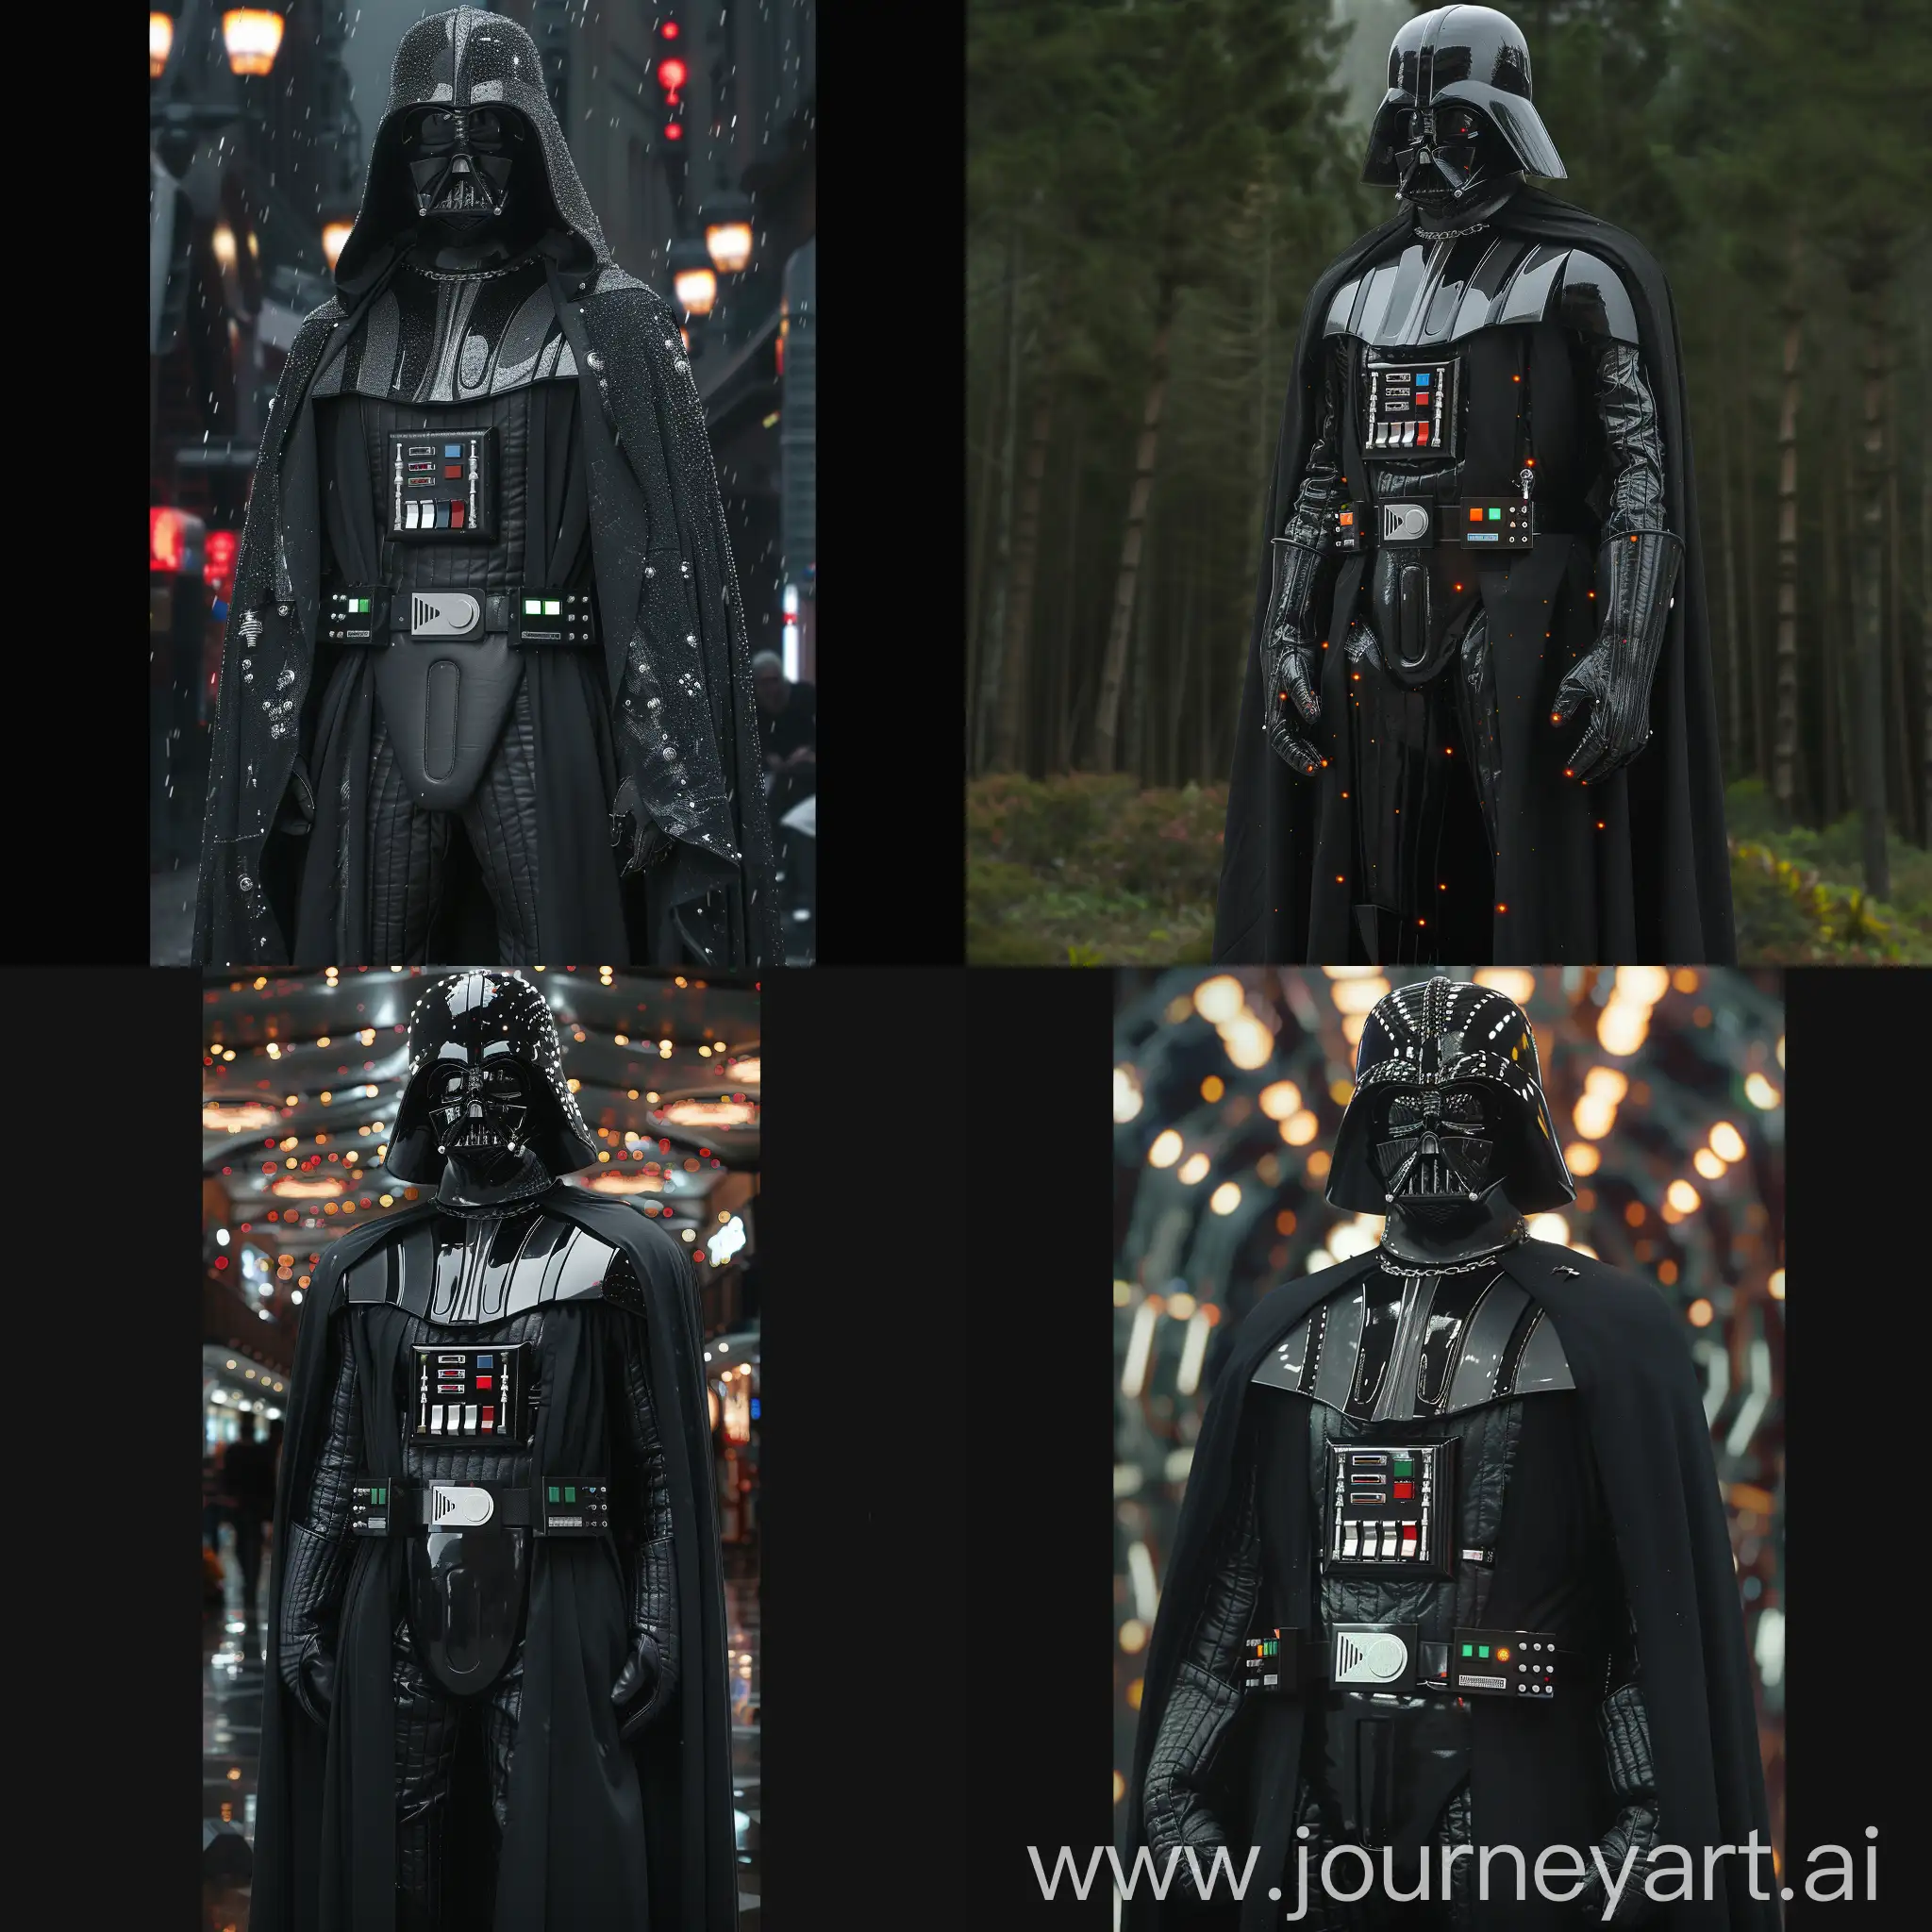 Futuristic-Darth-Vader-with-Advanced-Cybernetic-Enhancements-and-Nanotech-Abilities